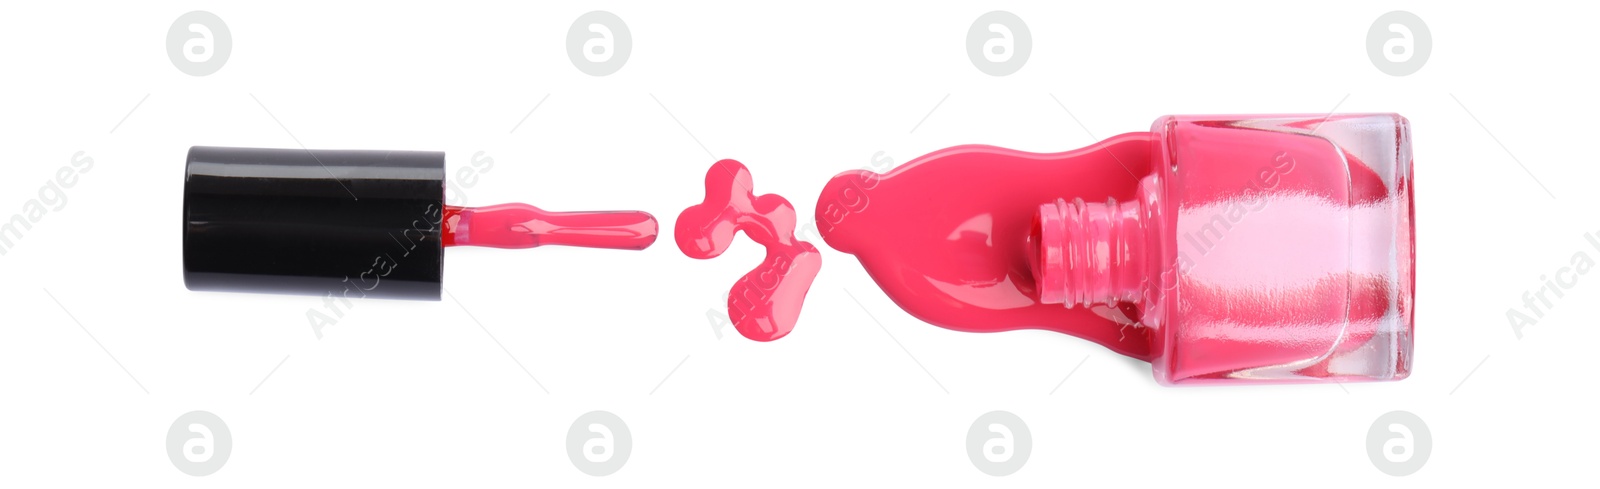 Photo of Bottle and brush with spilled pink nail polish isolated on white, top view